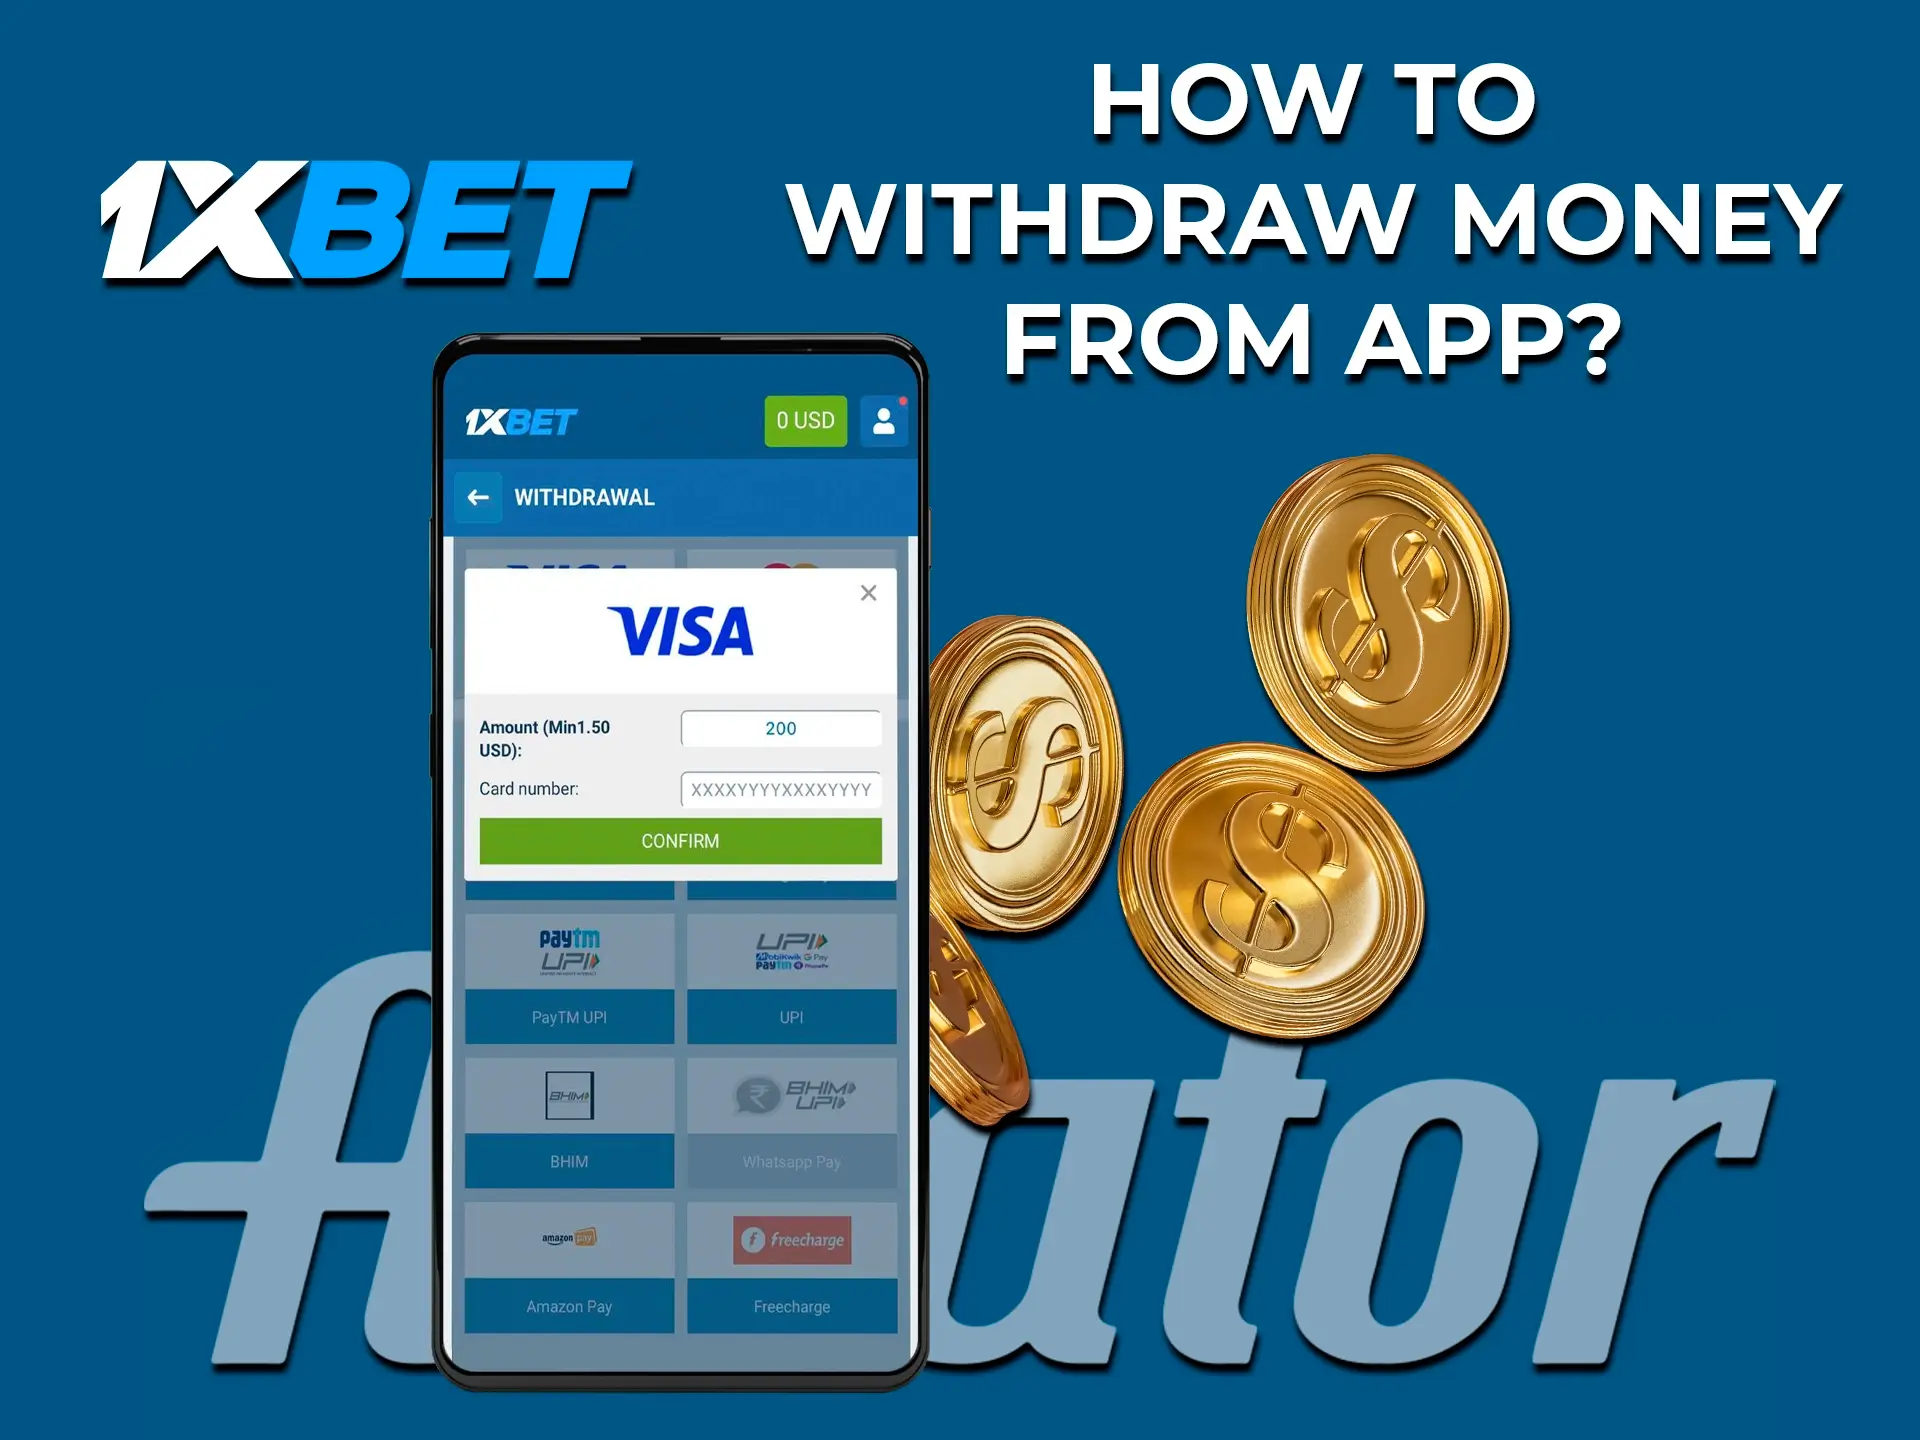 The 1xBet app allows its customers to withdraw funds in minutes.